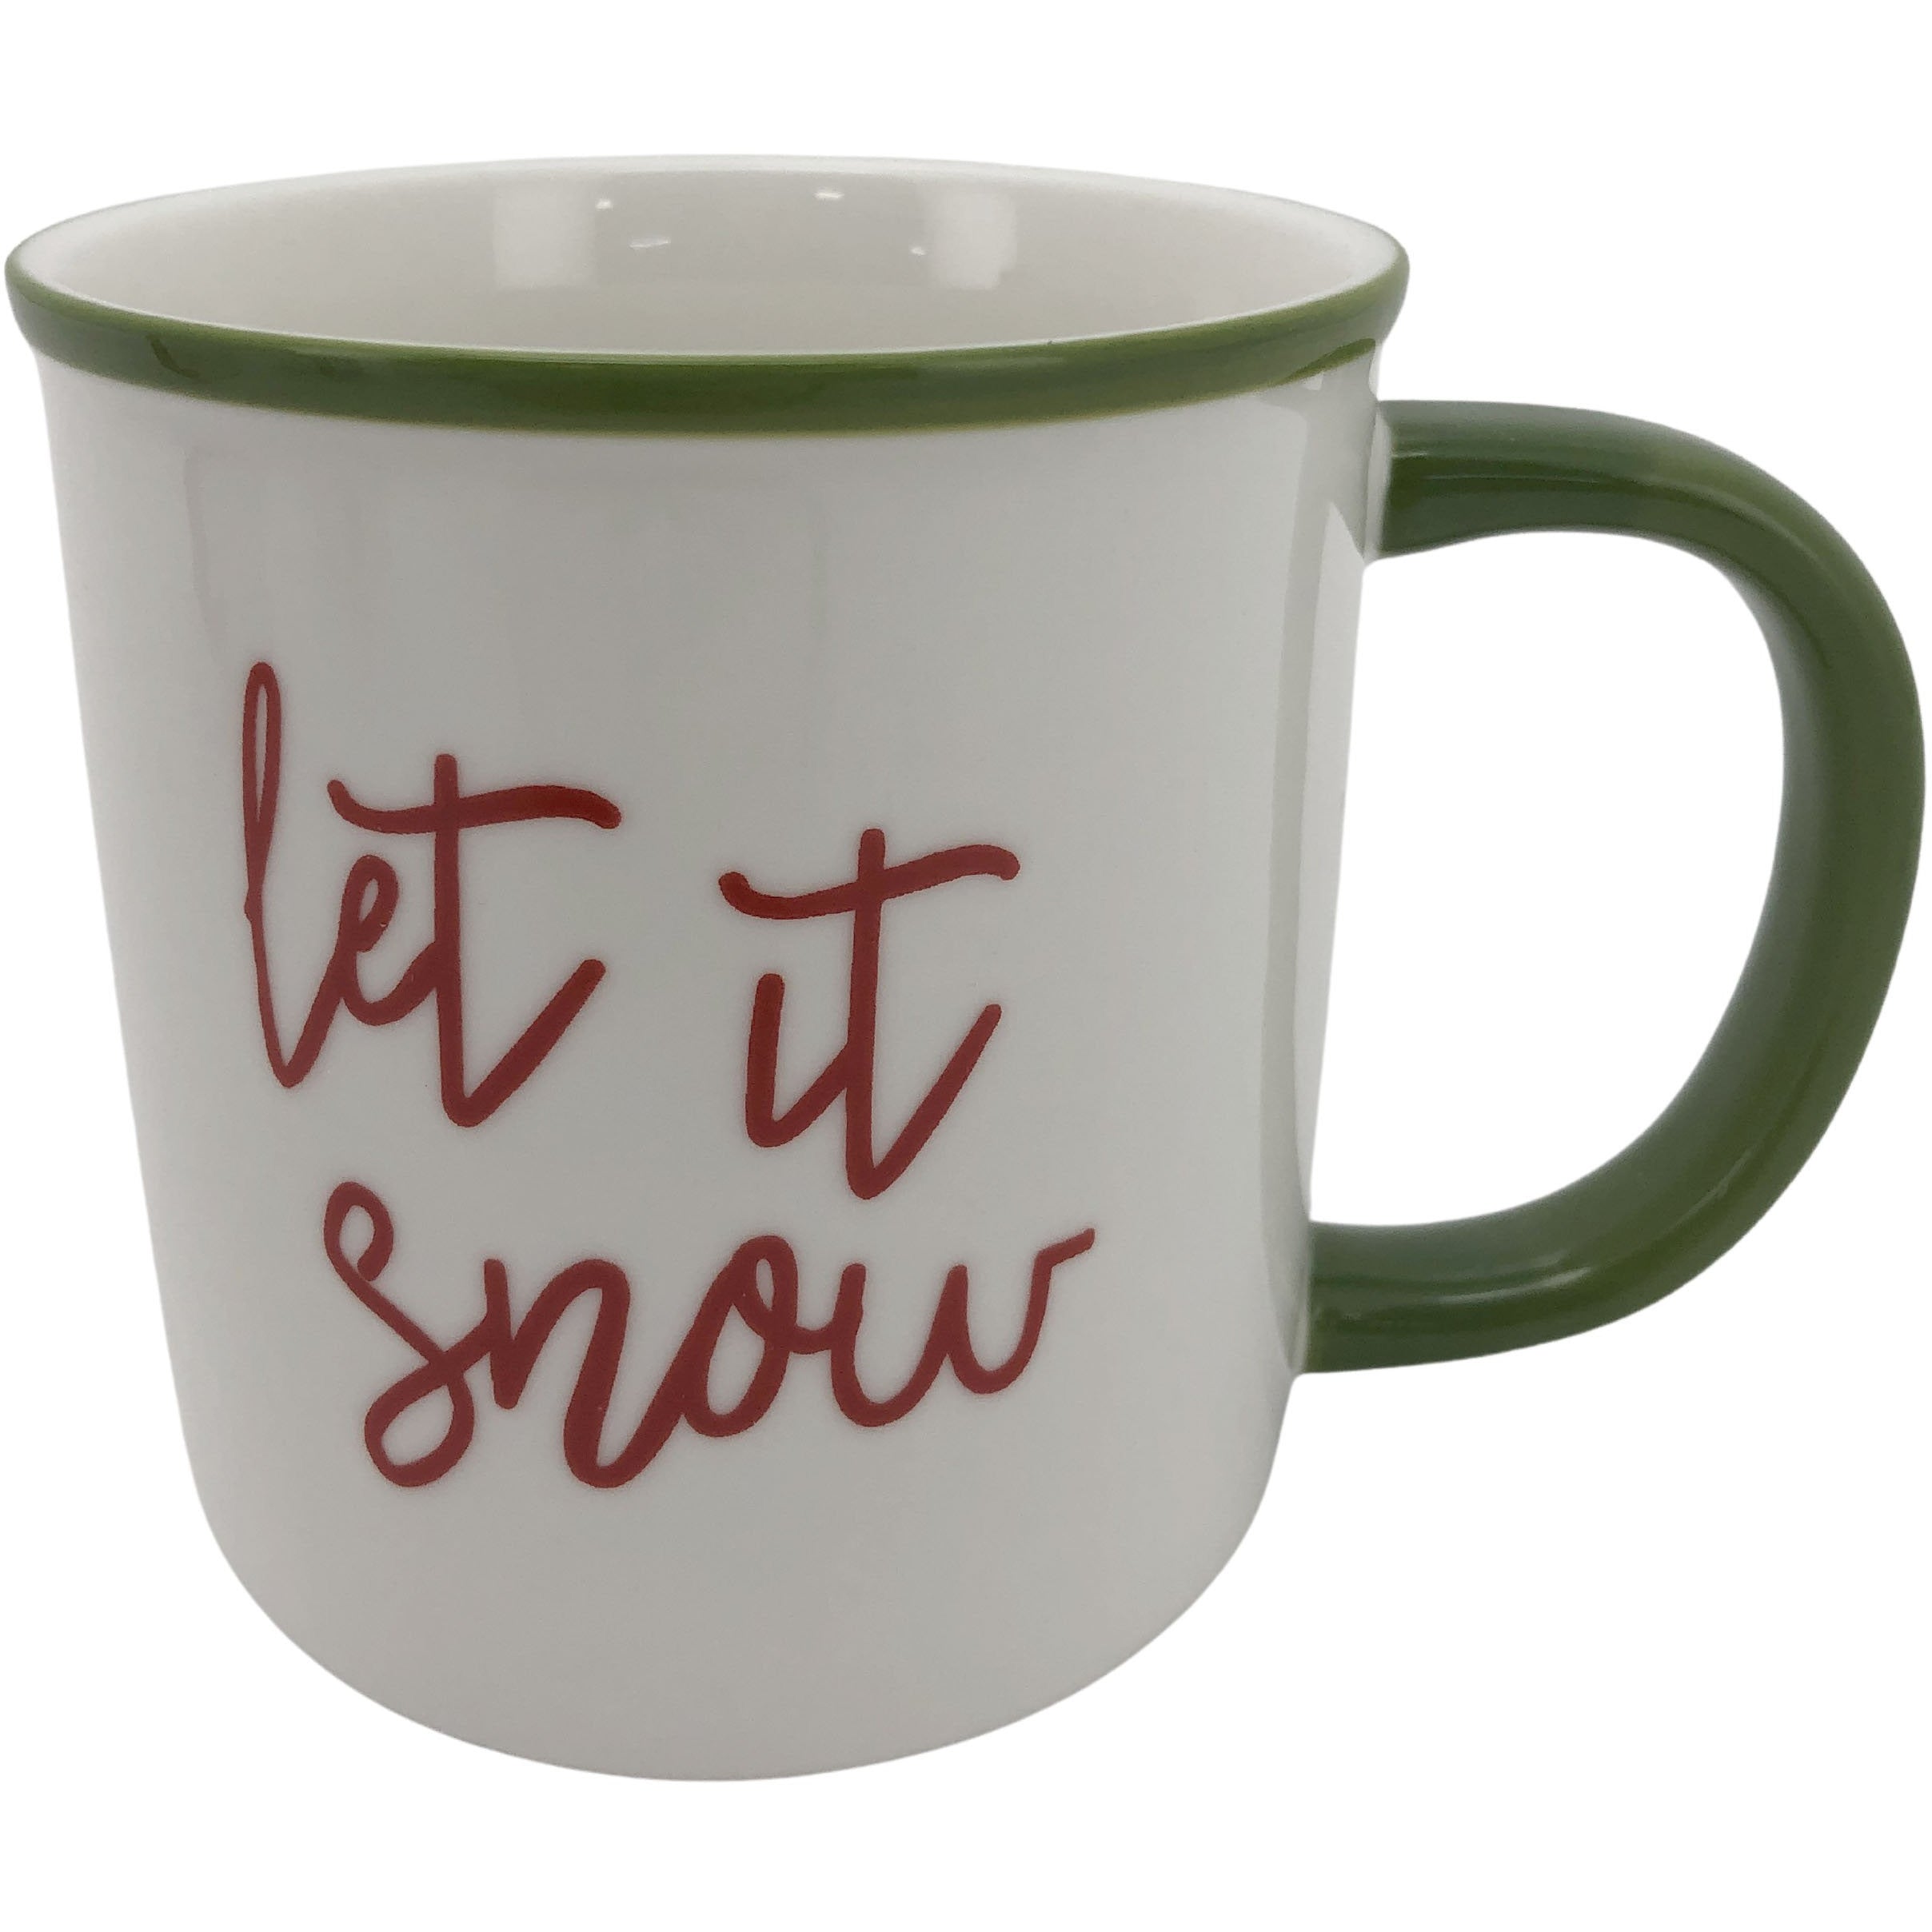 Holiday Christmas Coffee Mugs / Ceramic / Coffee Cup / "Joy" / "Holly Jolly" /"Let It Snow" / "Merry Christmas"